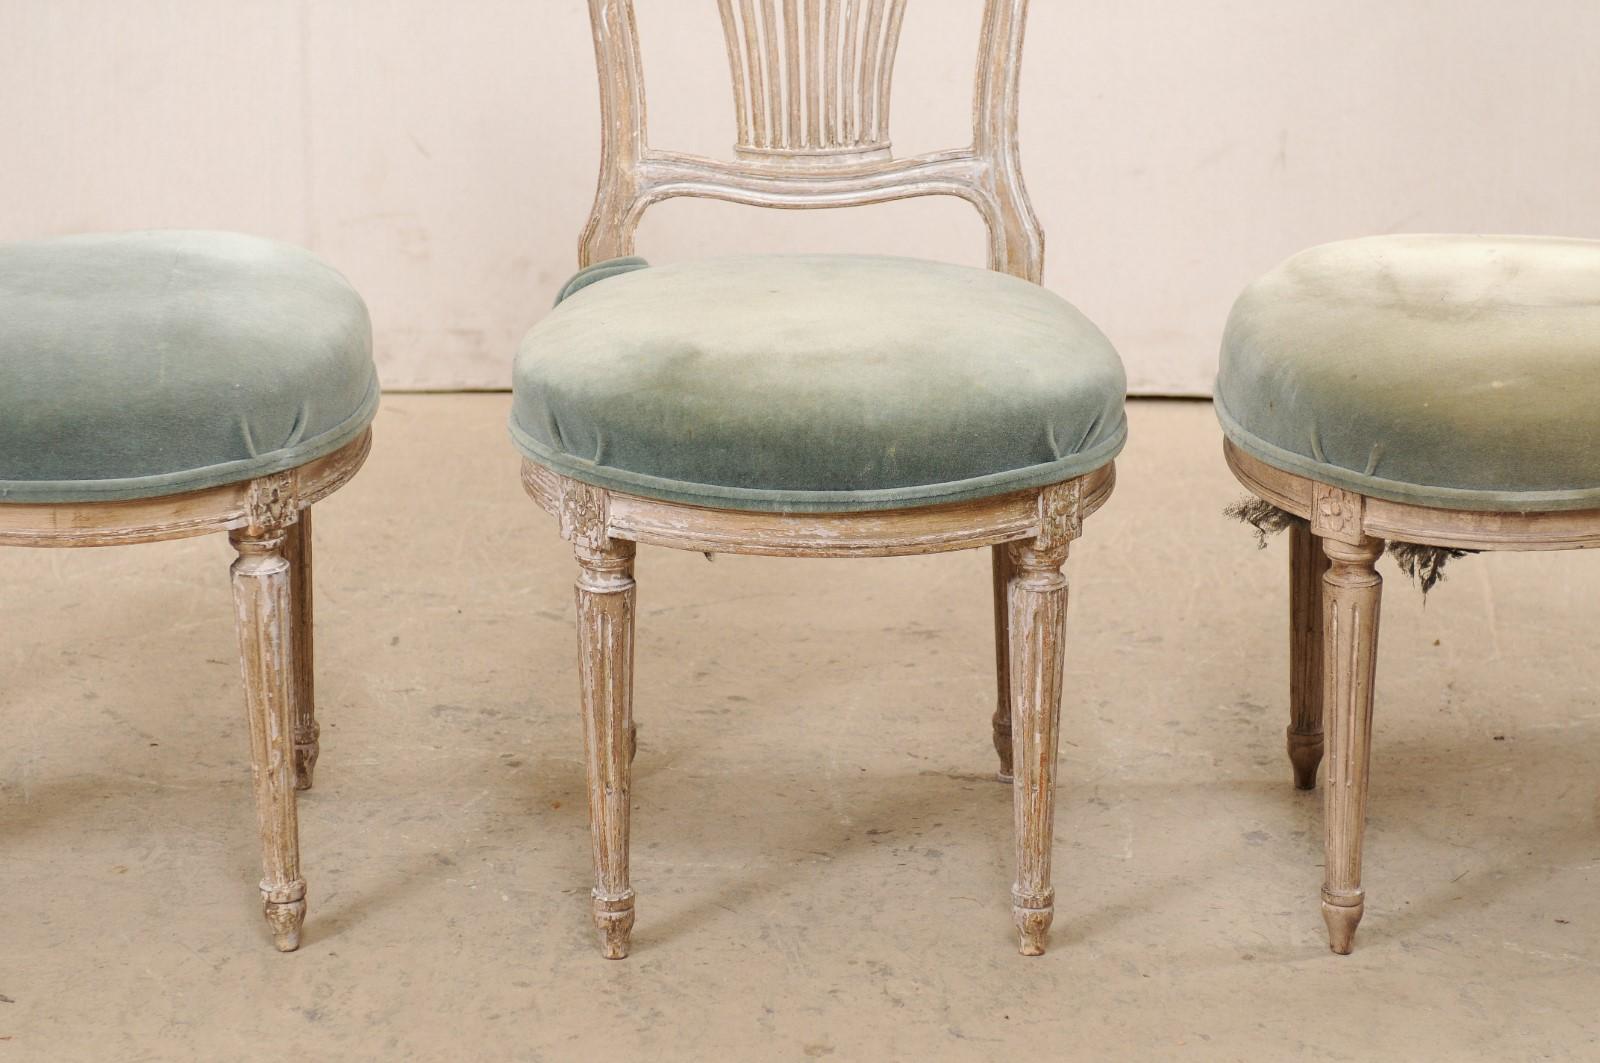 French Set of 4 Pierce-Carved Balloon-Back Side Chairs, Jansen-Style 1